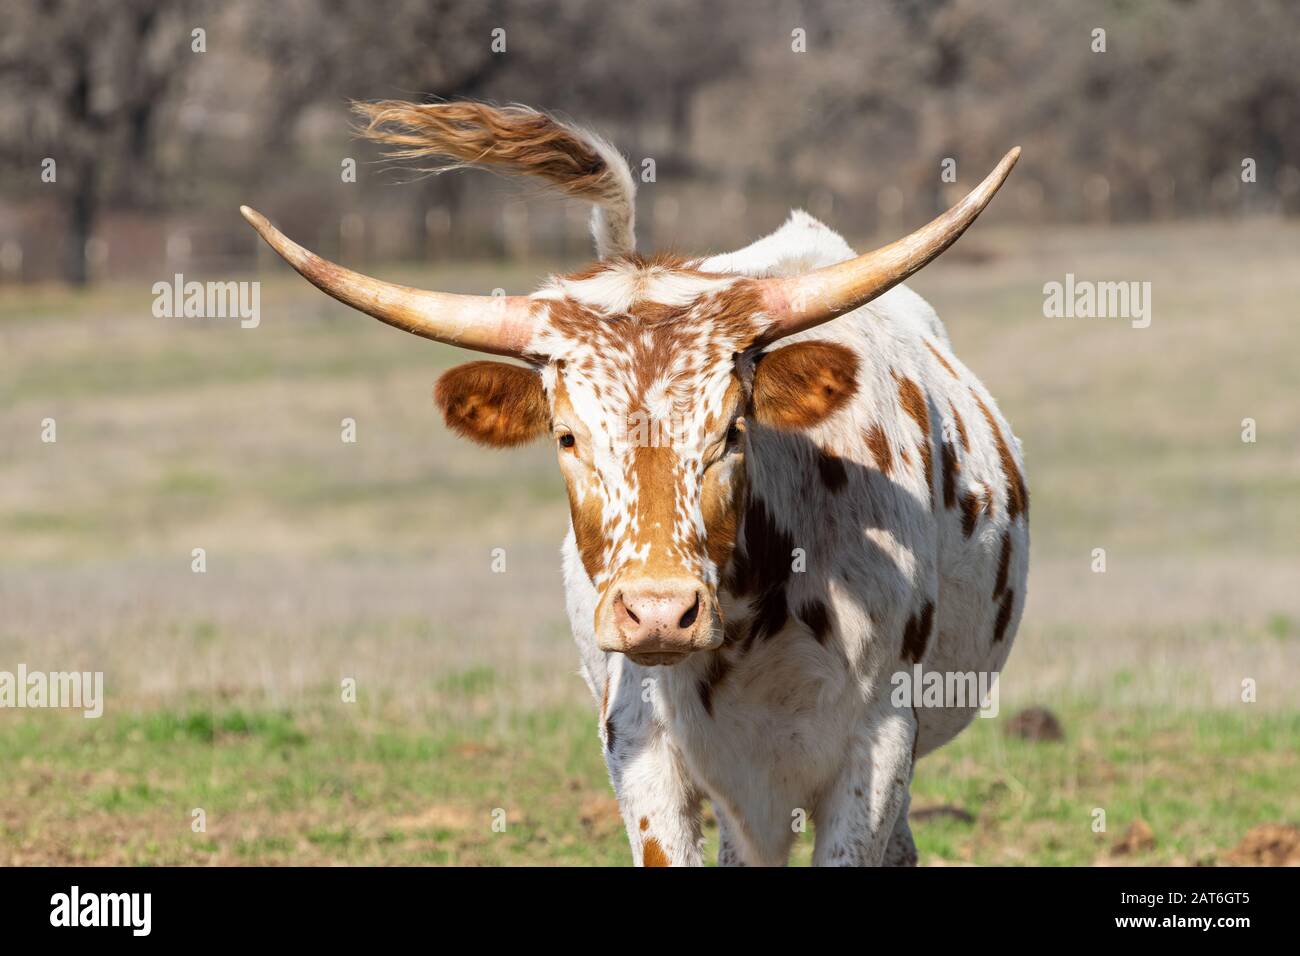 Young white Longhorn calf with brown spots and short, curved horns staring into the camera with his tail swishing in the air behind him. Stock Photo